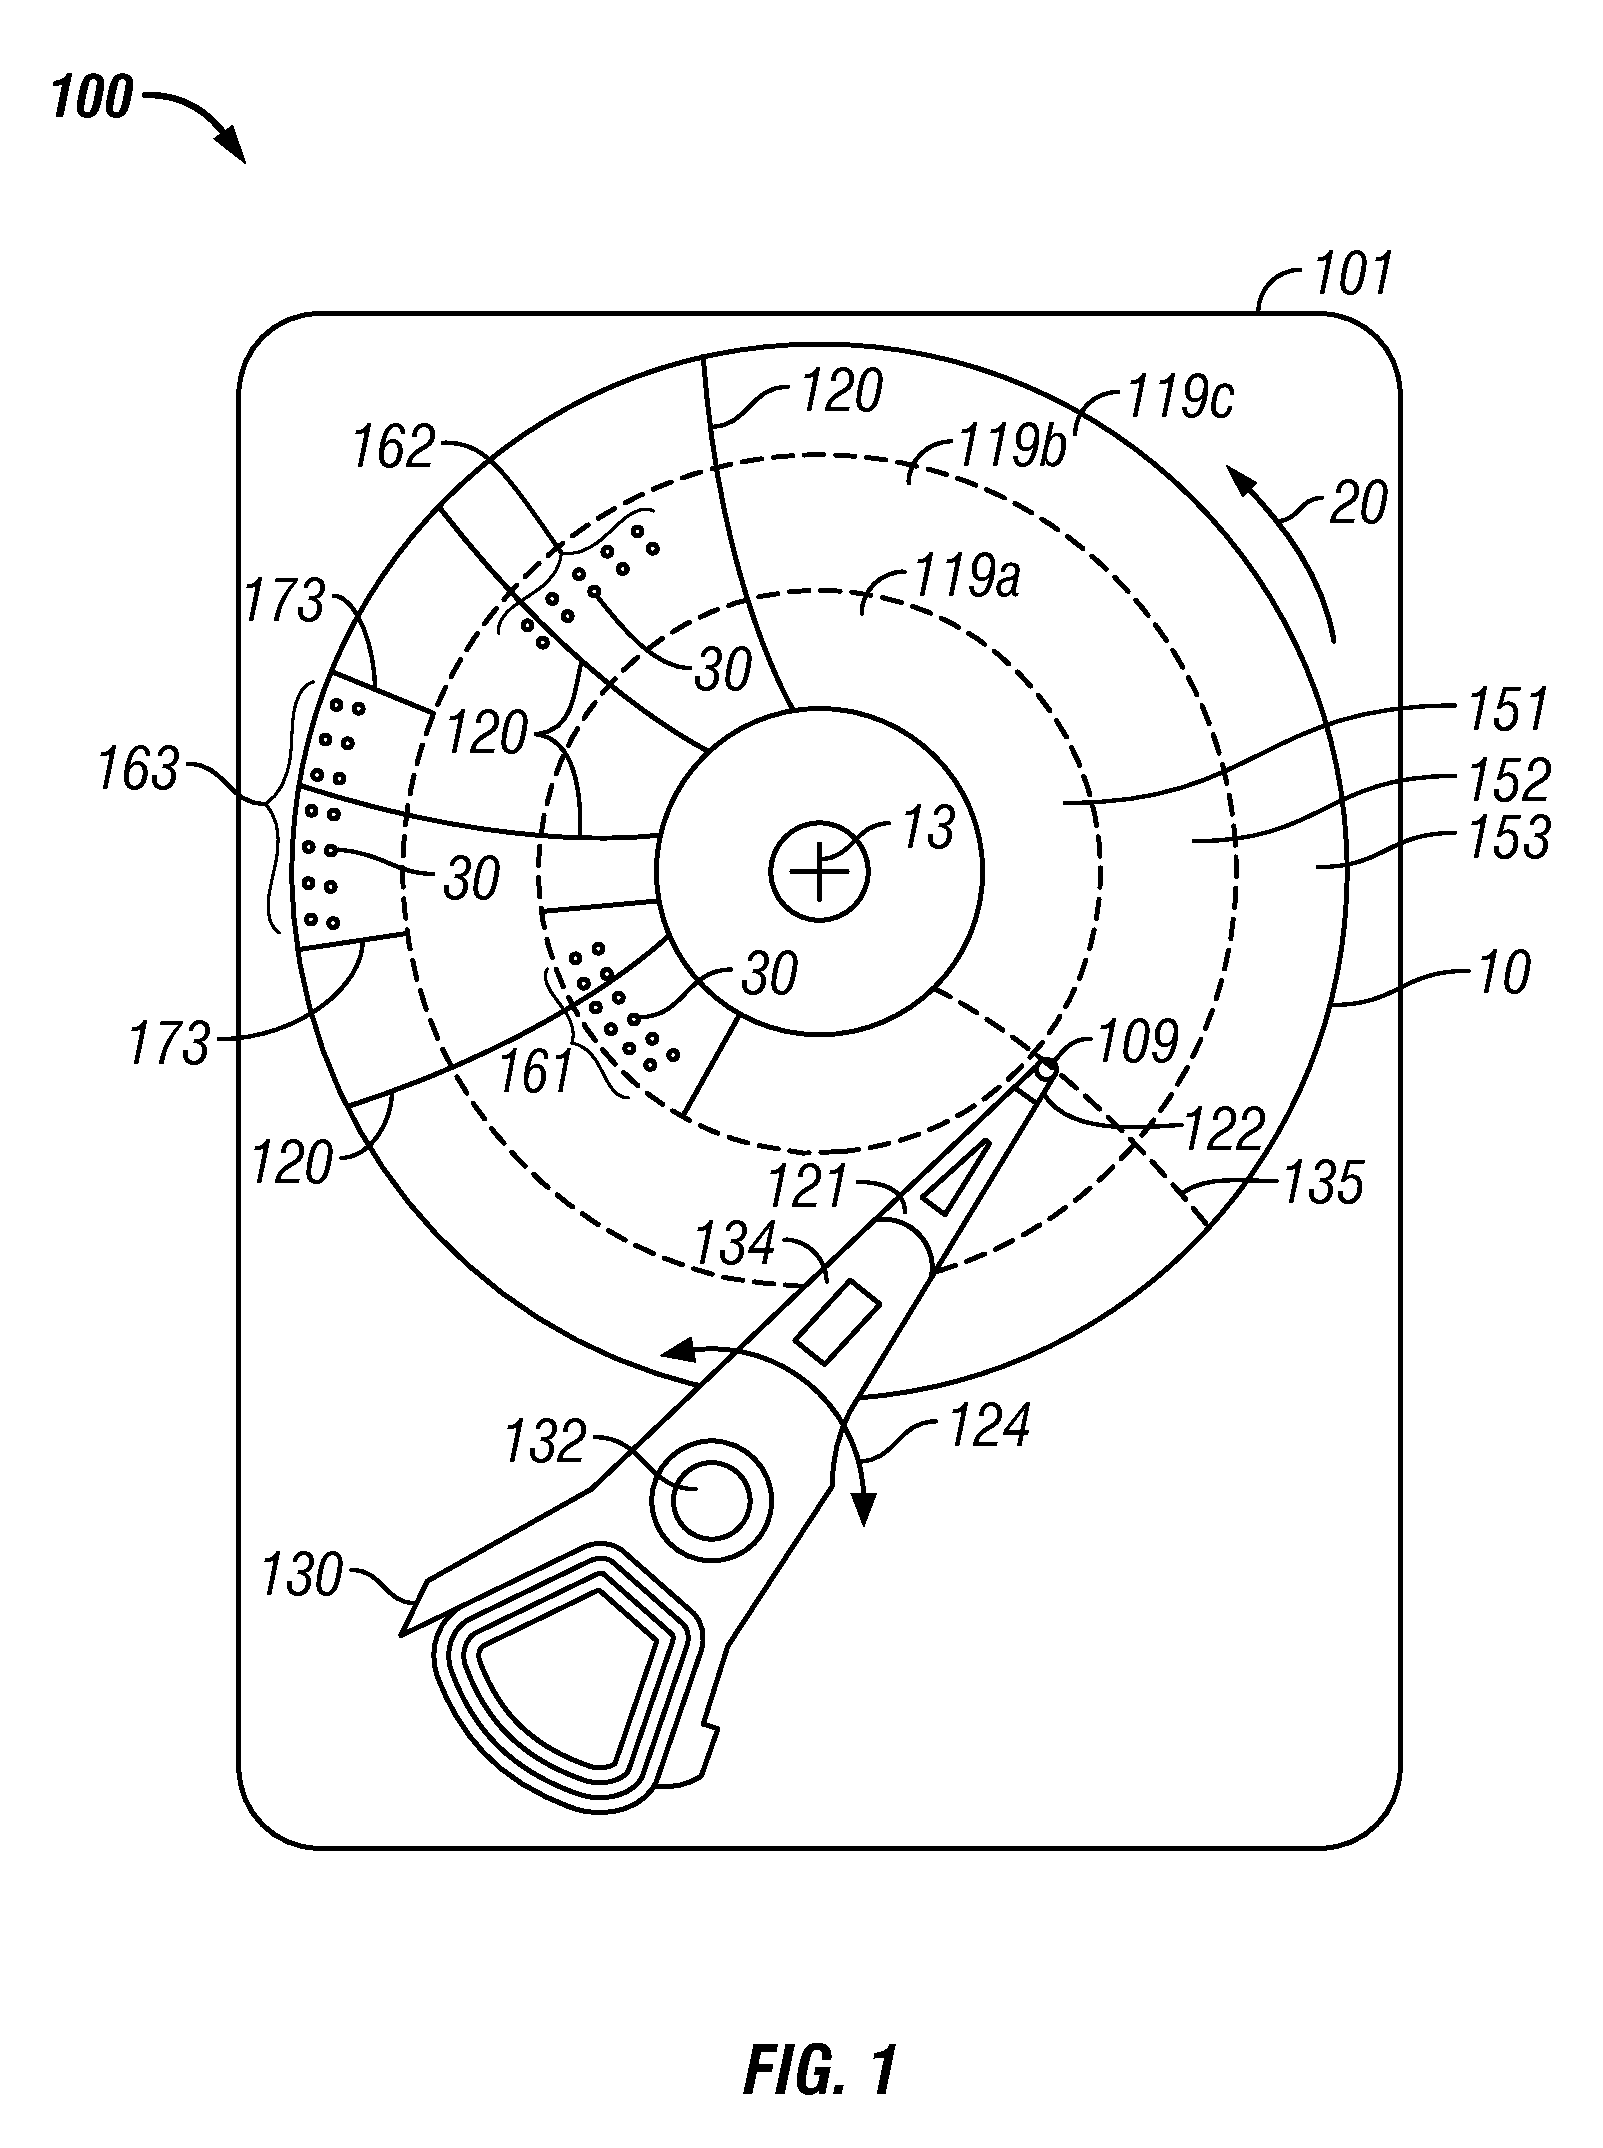 Patterned media magnetic recording disk drive with write clock phase adjustment for write head track misregistration